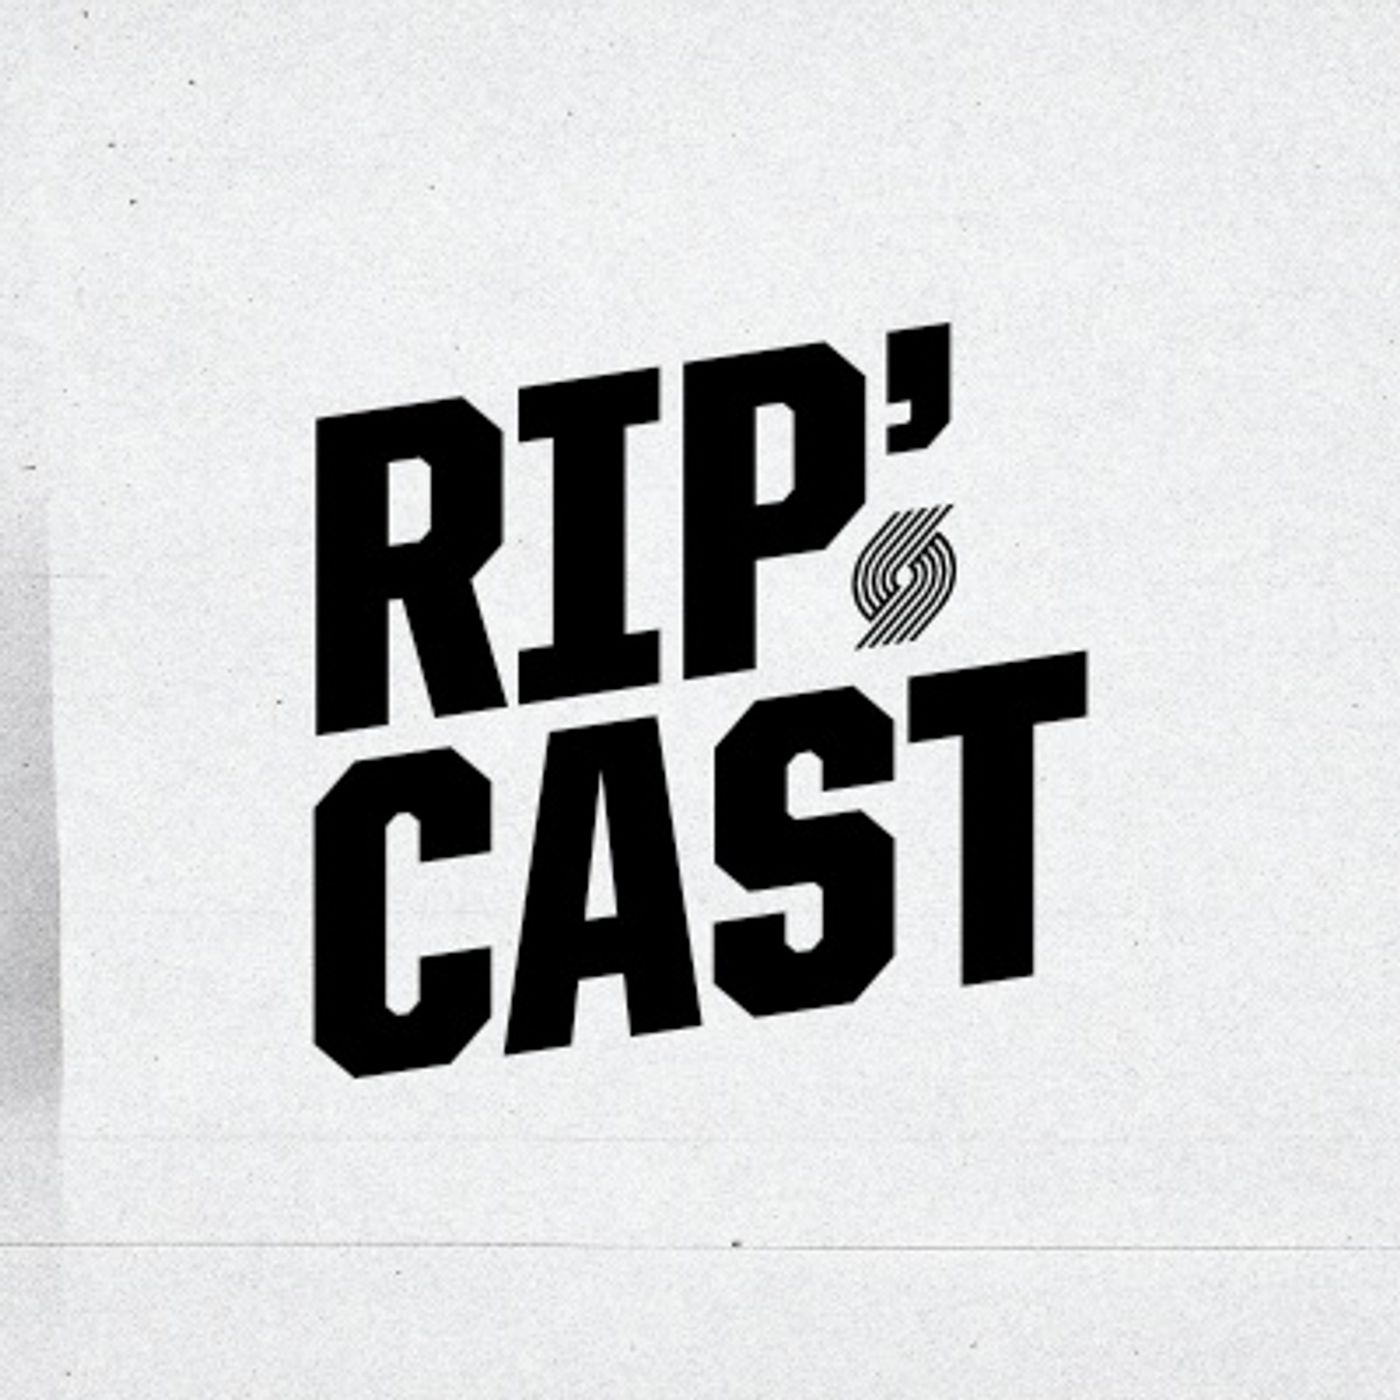 The Rip'Cast